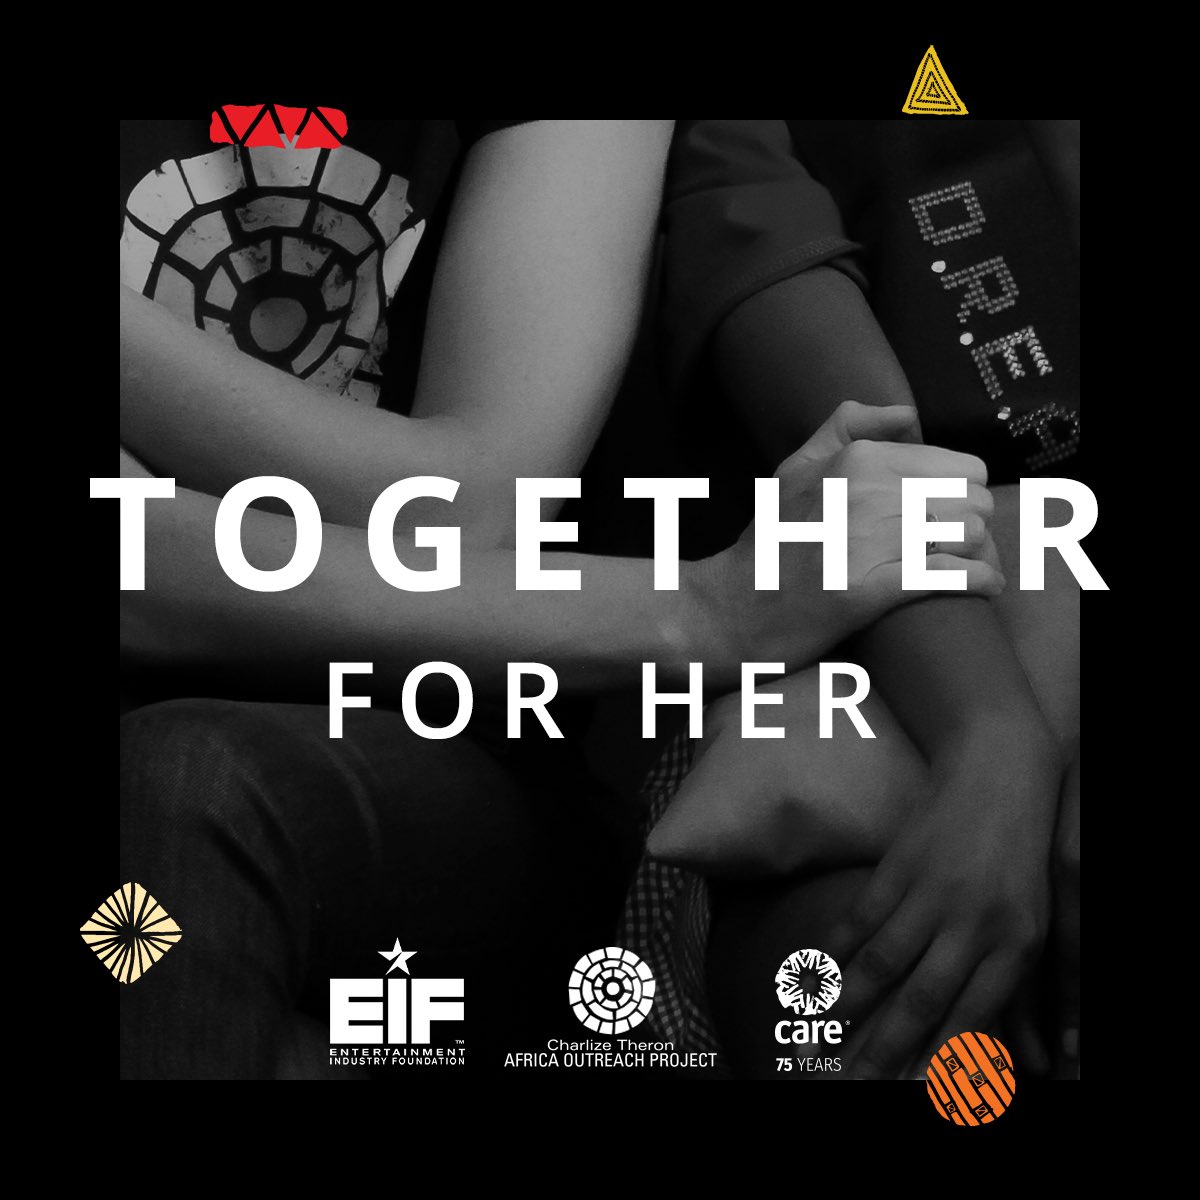 Our rallying cry is this: Please join us in showing women experiencing domestic violence that they are not alone – we are behind them, with them, for them,  #TogetherForHer.